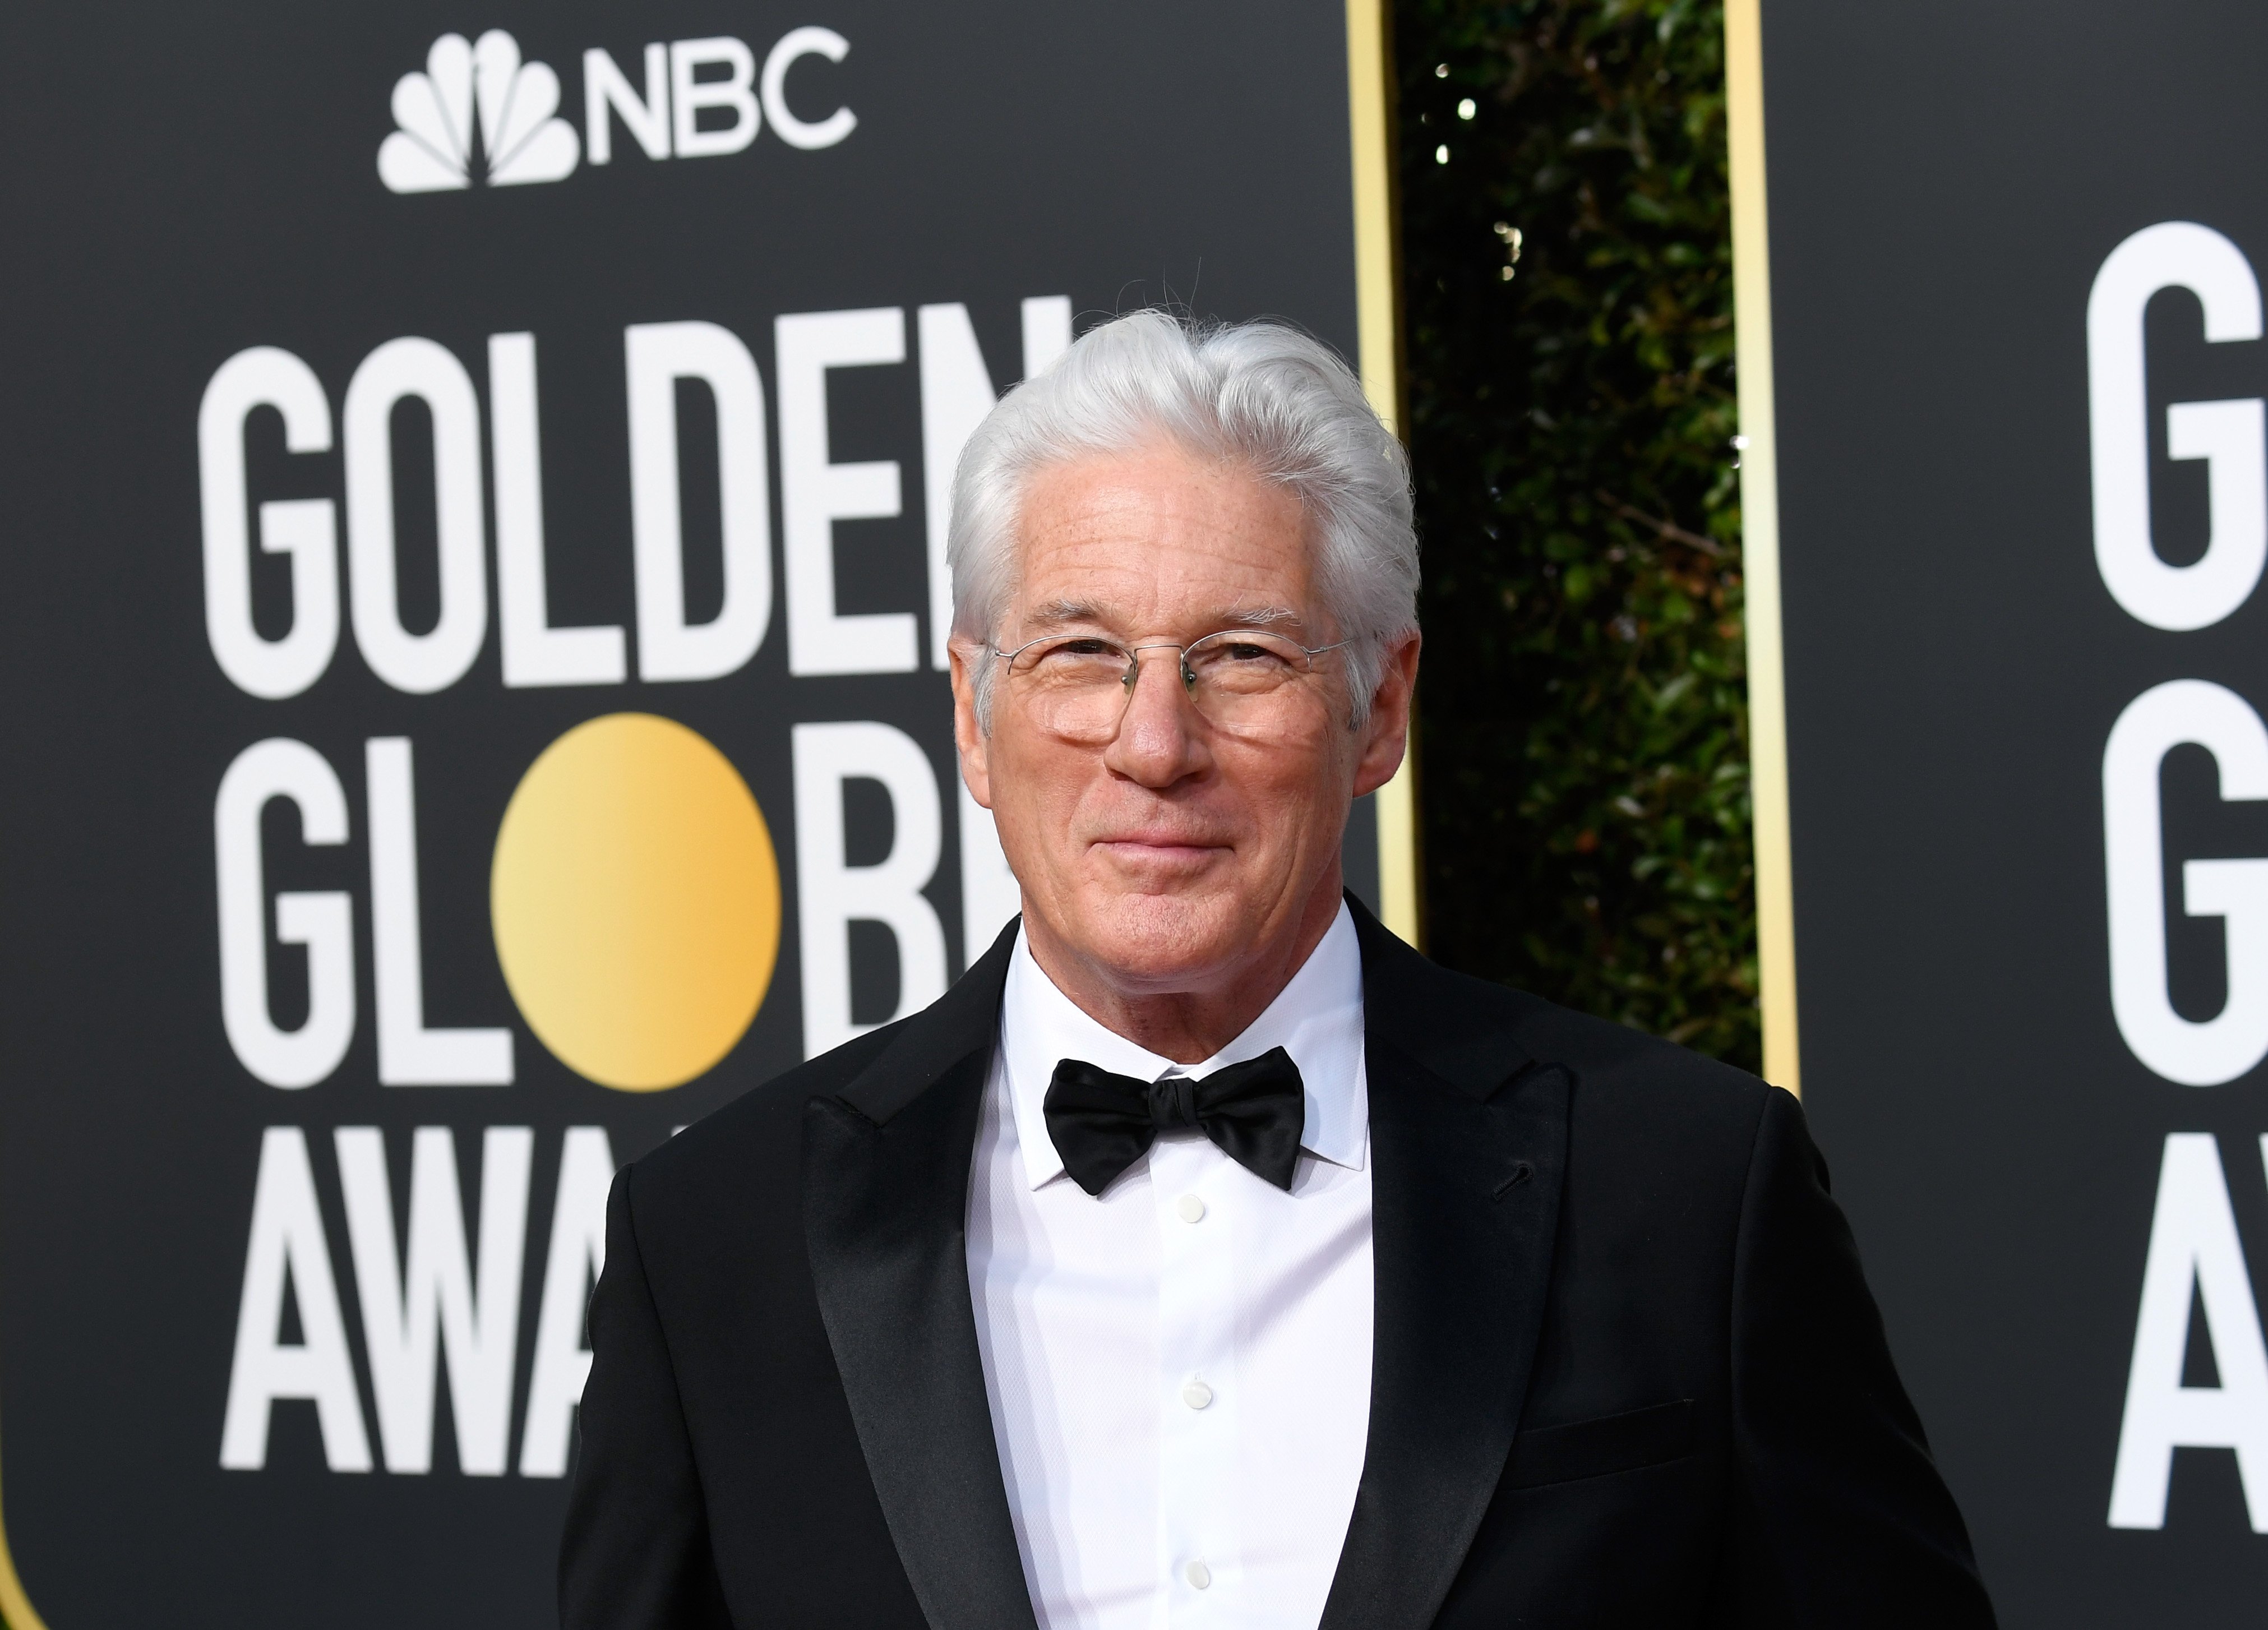 Richard Gere attends the 76th Annual Golden Globe Awards at The Beverly Hilton Hotel on January 6, 2019 in Beverly Hills, California. |  Source: Getty Images